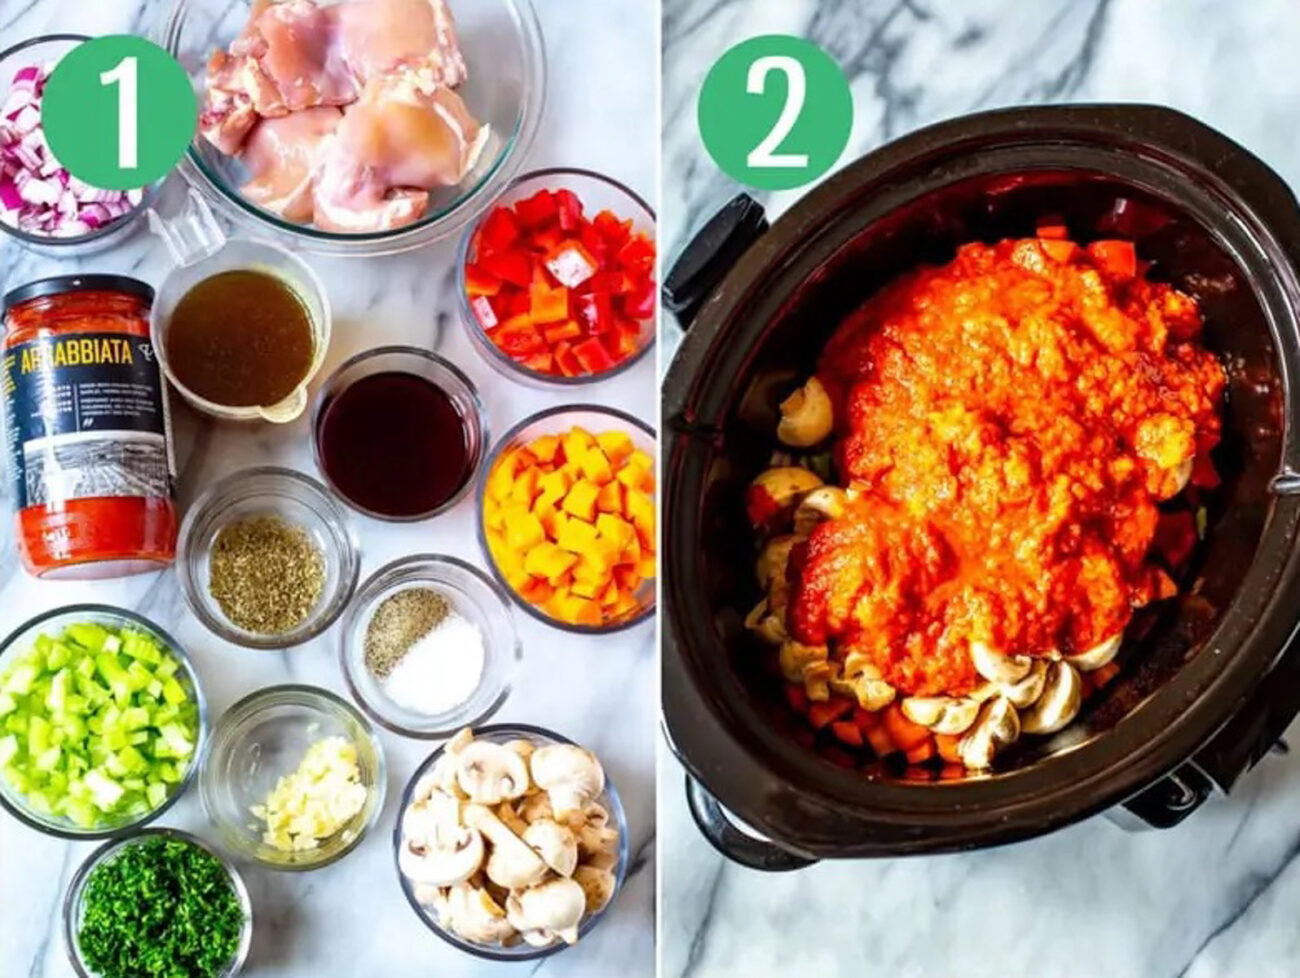 Steps 1 and 2 for making slow cooker chicken cacciatore: Assemble ingredients and put them in the slow cooker.